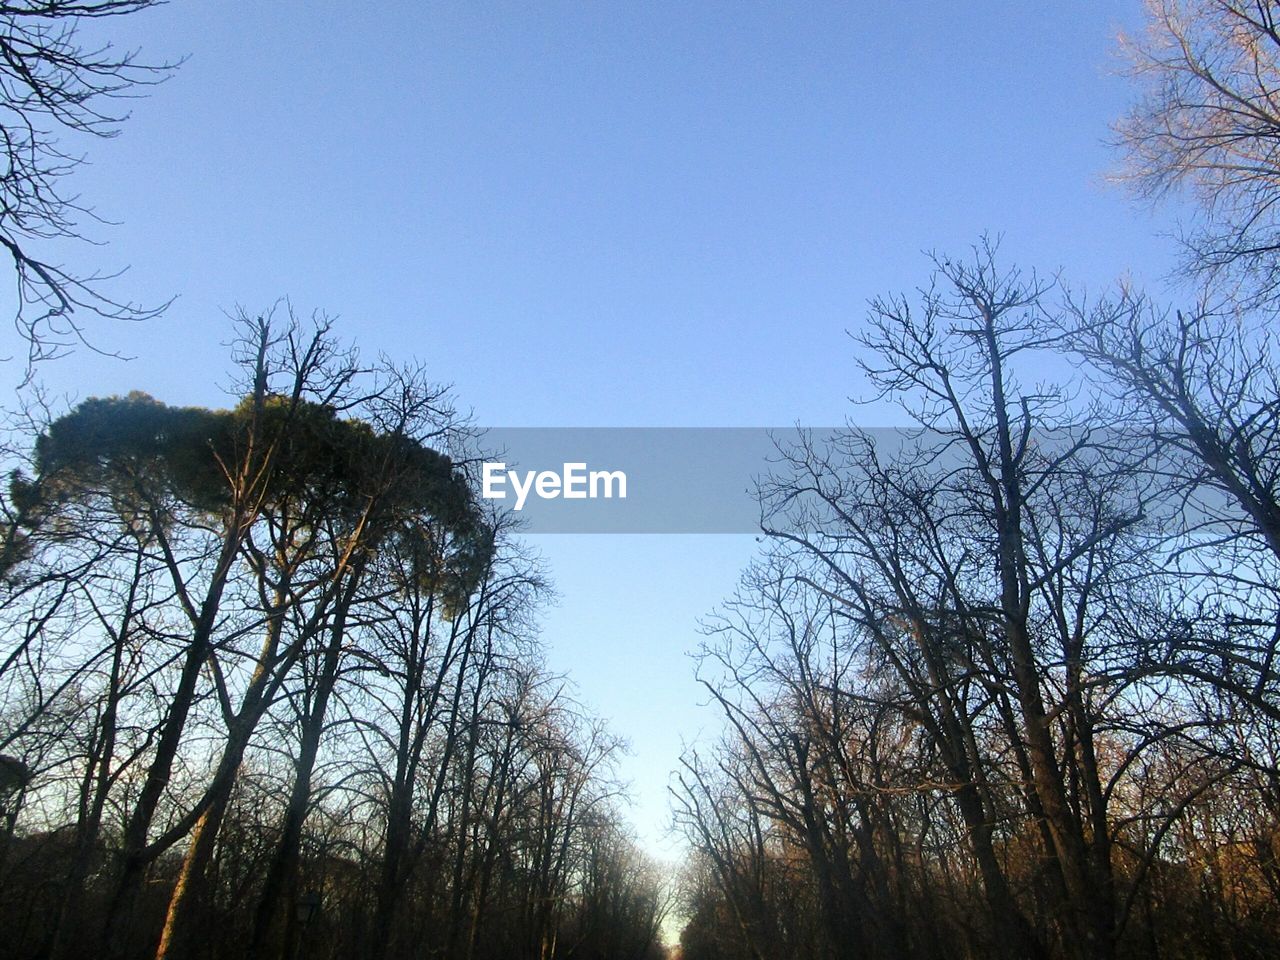 LOW ANGLE VIEW OF BARE TREES AGAINST CLEAR SKY